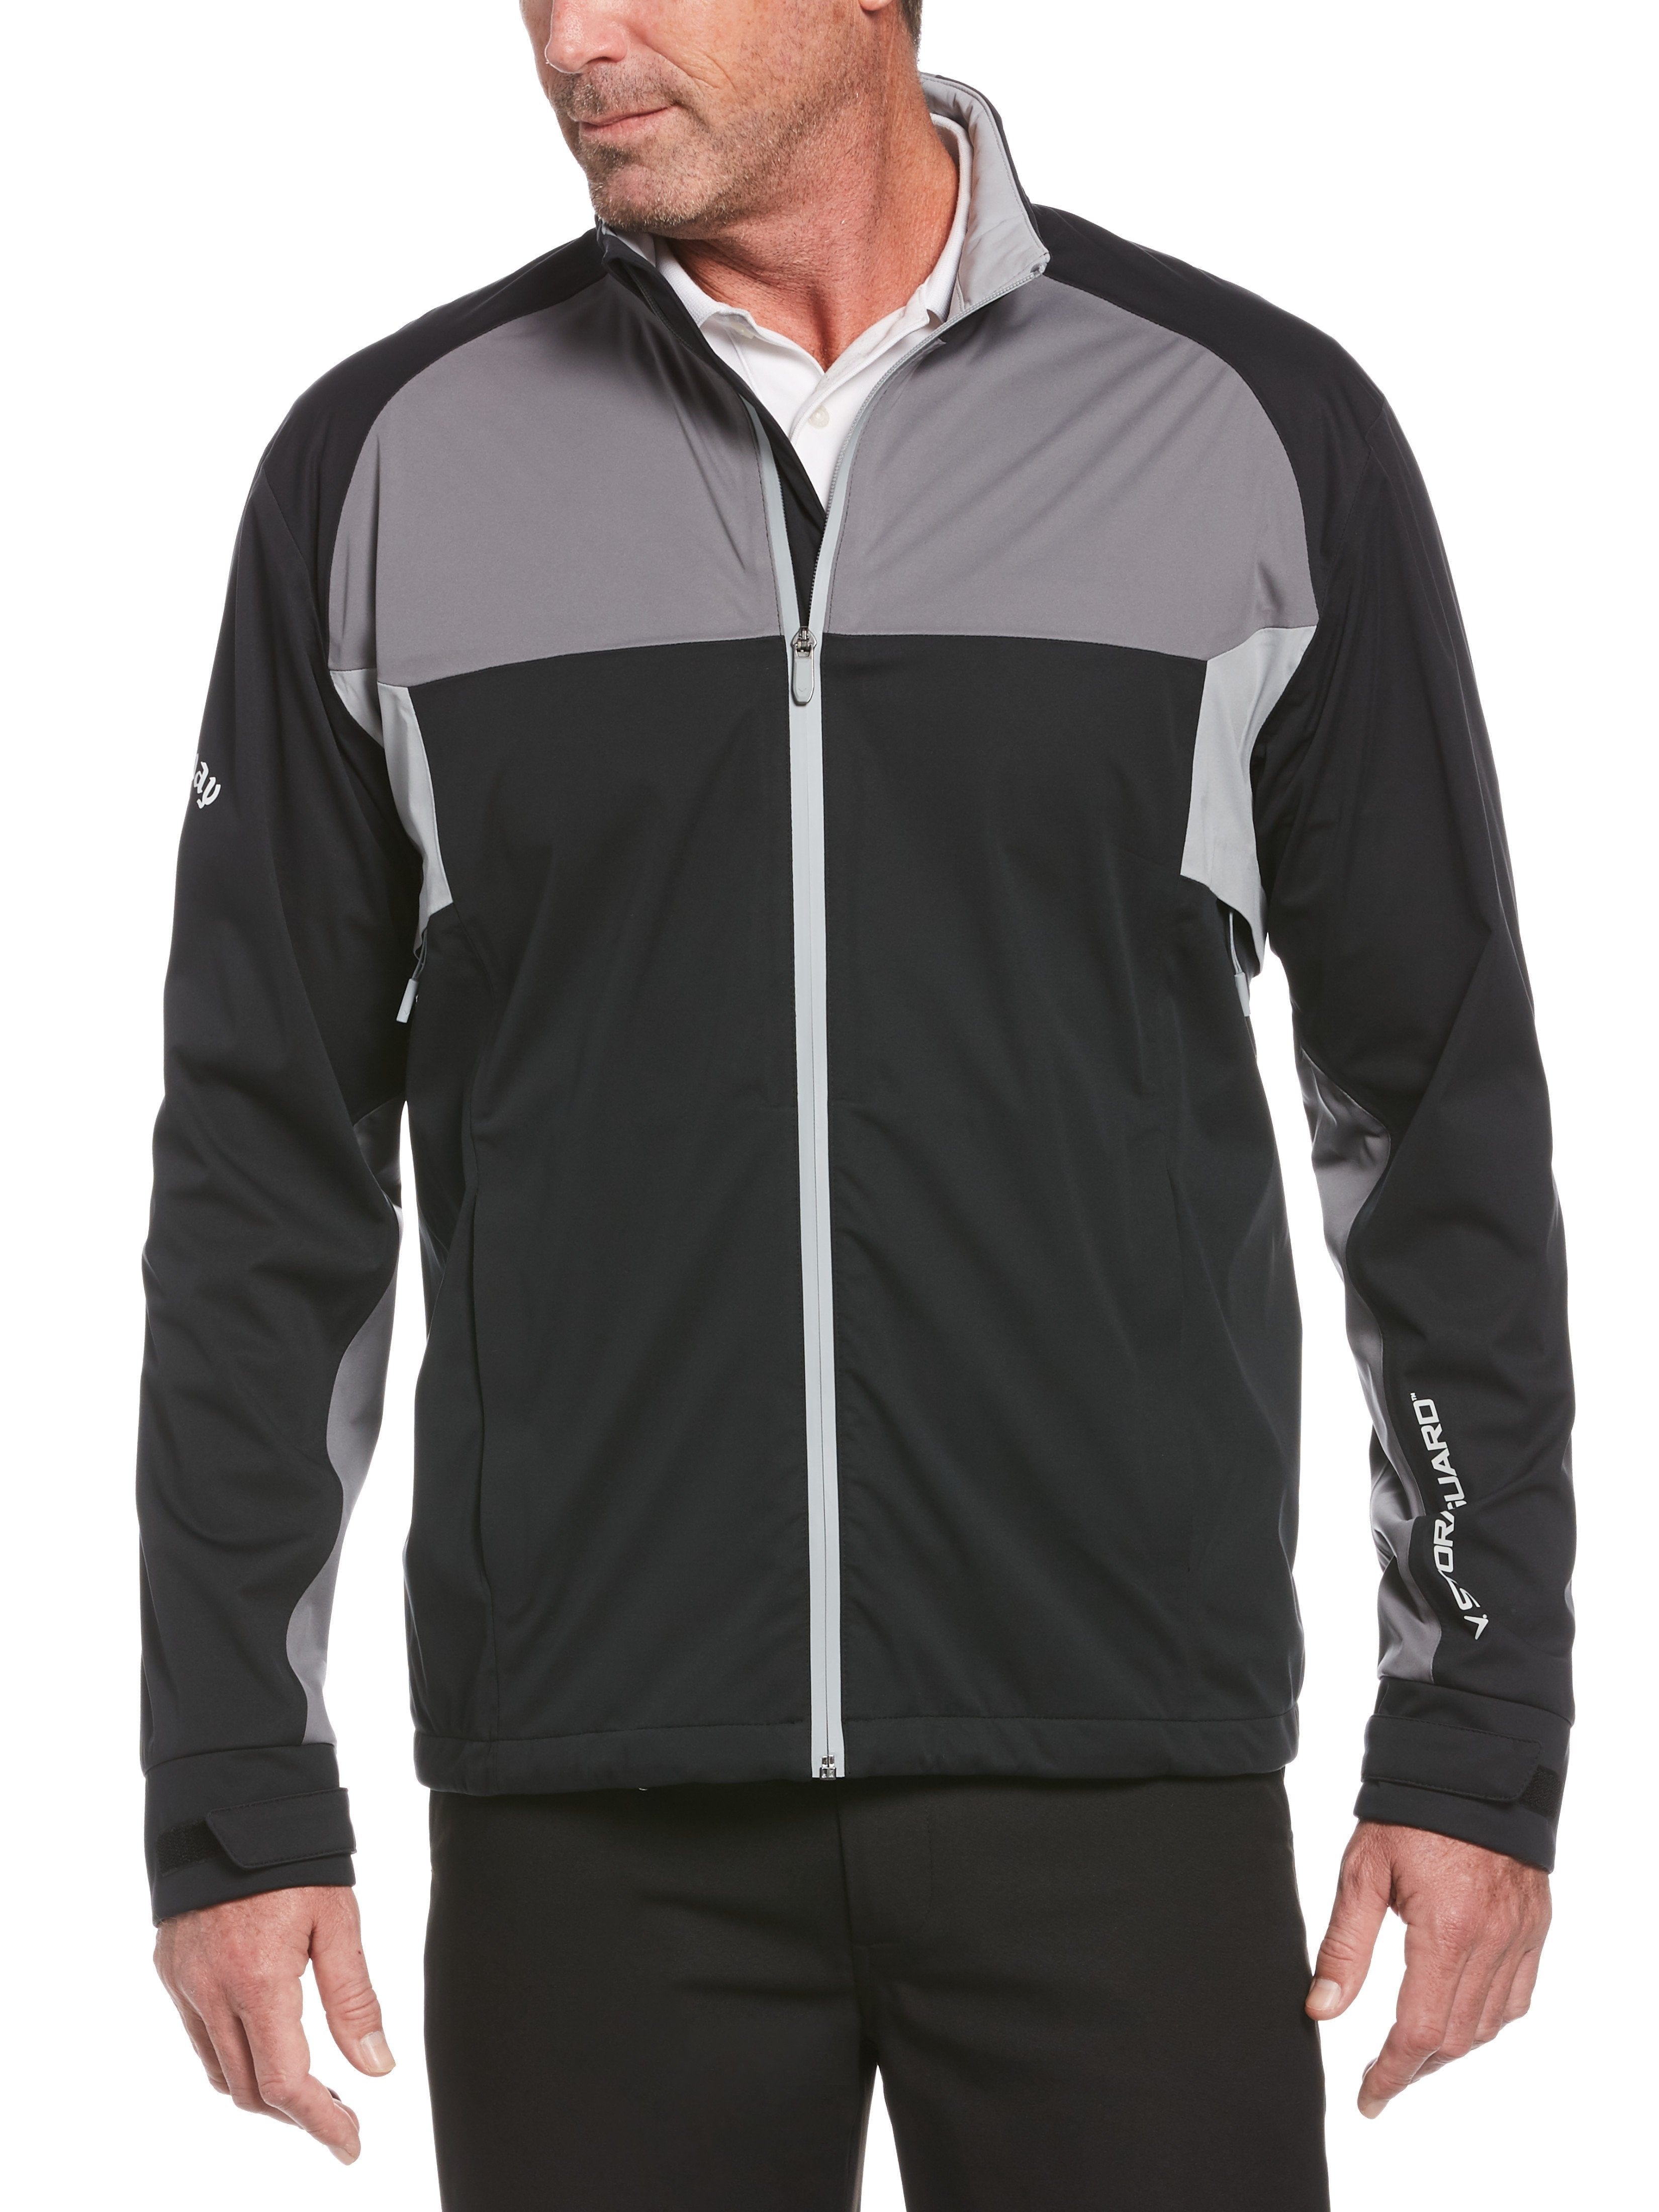 Callaway Apparel Mens Swing Tech™ StormGuard™ Water-Resistant Golf Jacket Top, Size Small, Black, Recycled Polyester/Polyester | Golf Apparel Shop